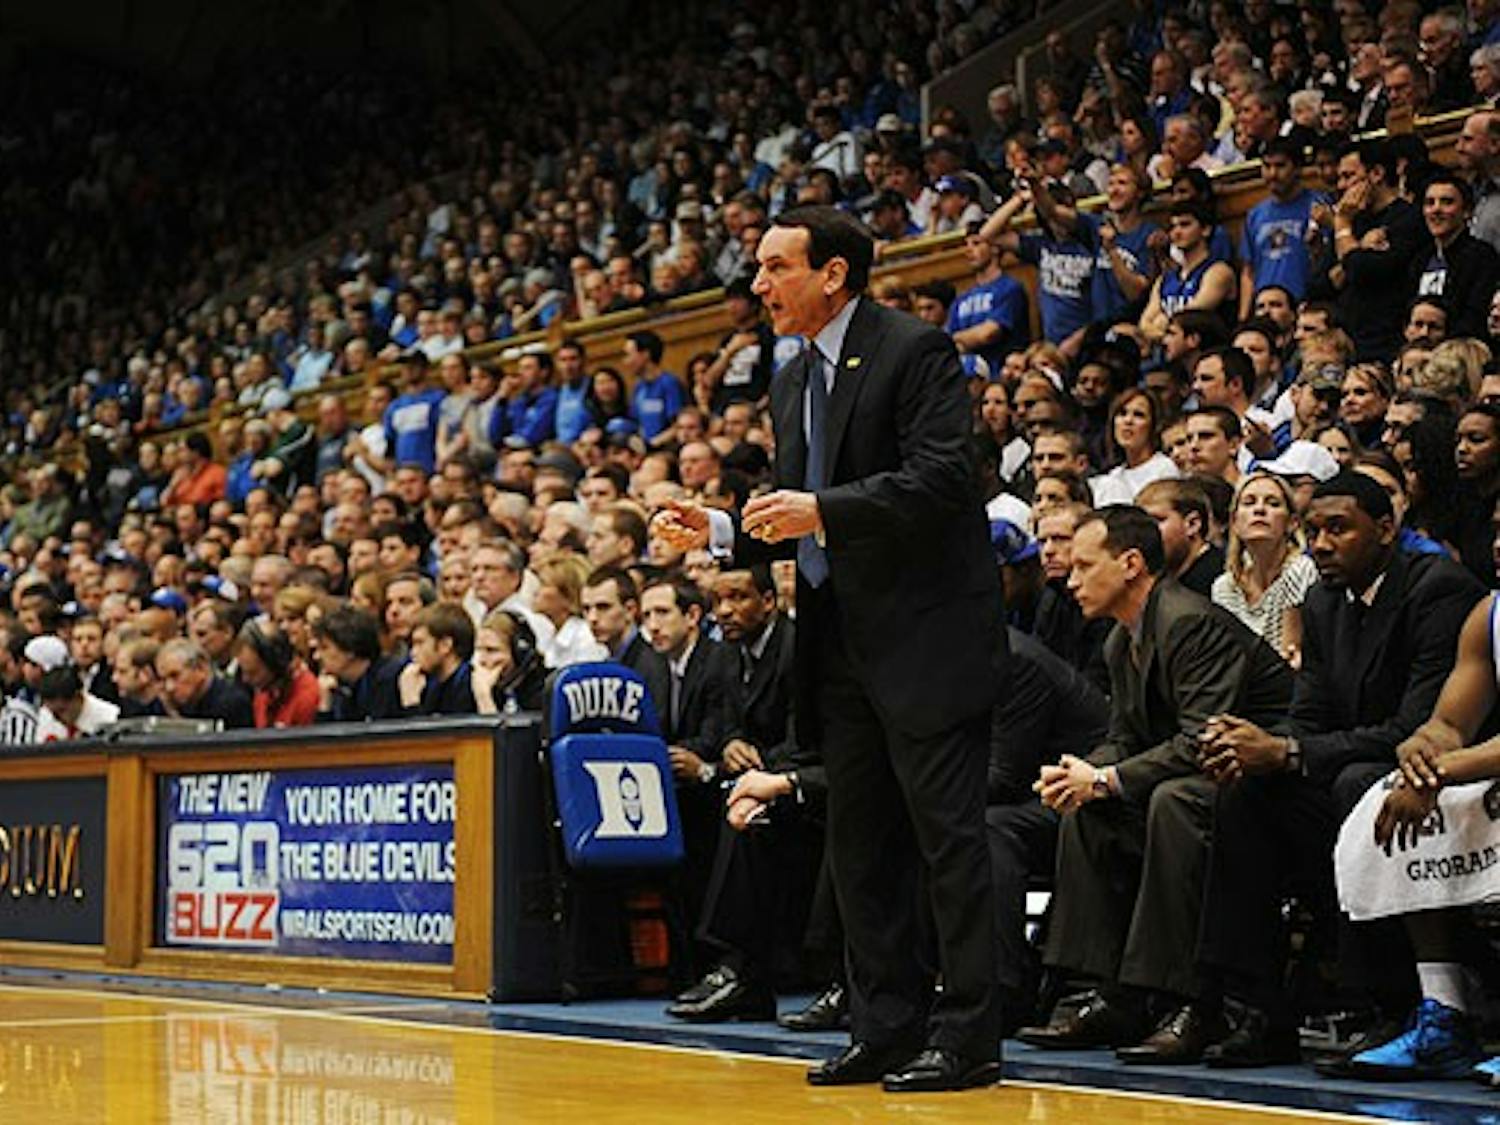 While head coach Mike Krzyzewski thought the China trip was a good idea as far back as 2009, many factors, including a Team U.S.A. victory in 2010, had to fall in place.